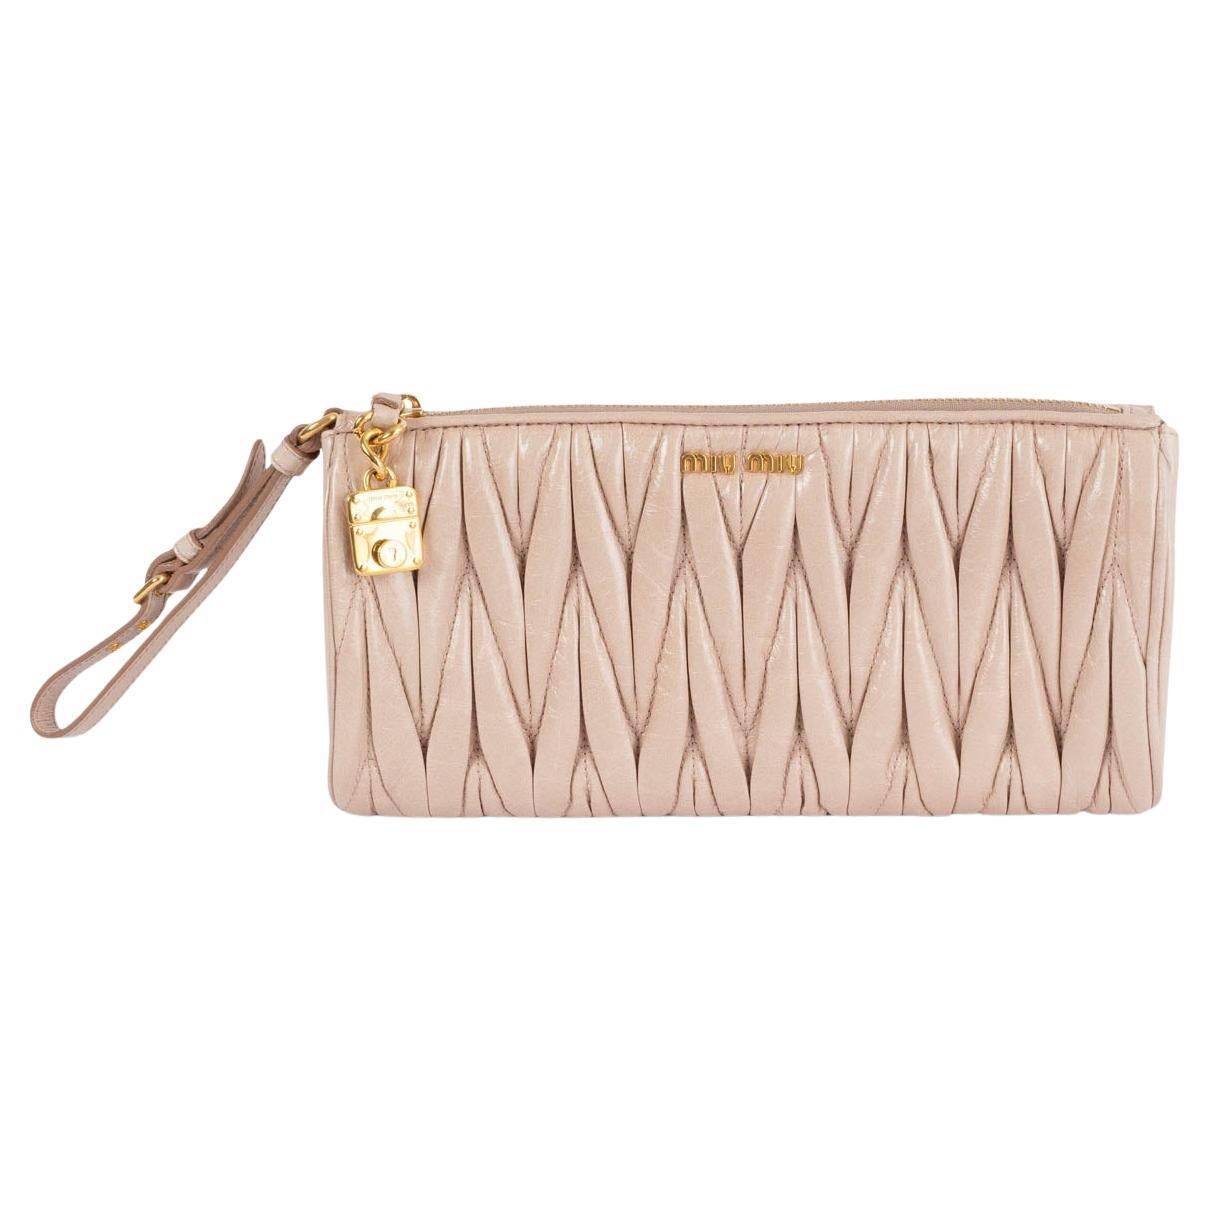 MIU MIU nude pink leather MATELASSE QUILTED Wristlet Clutch Bag For Sale